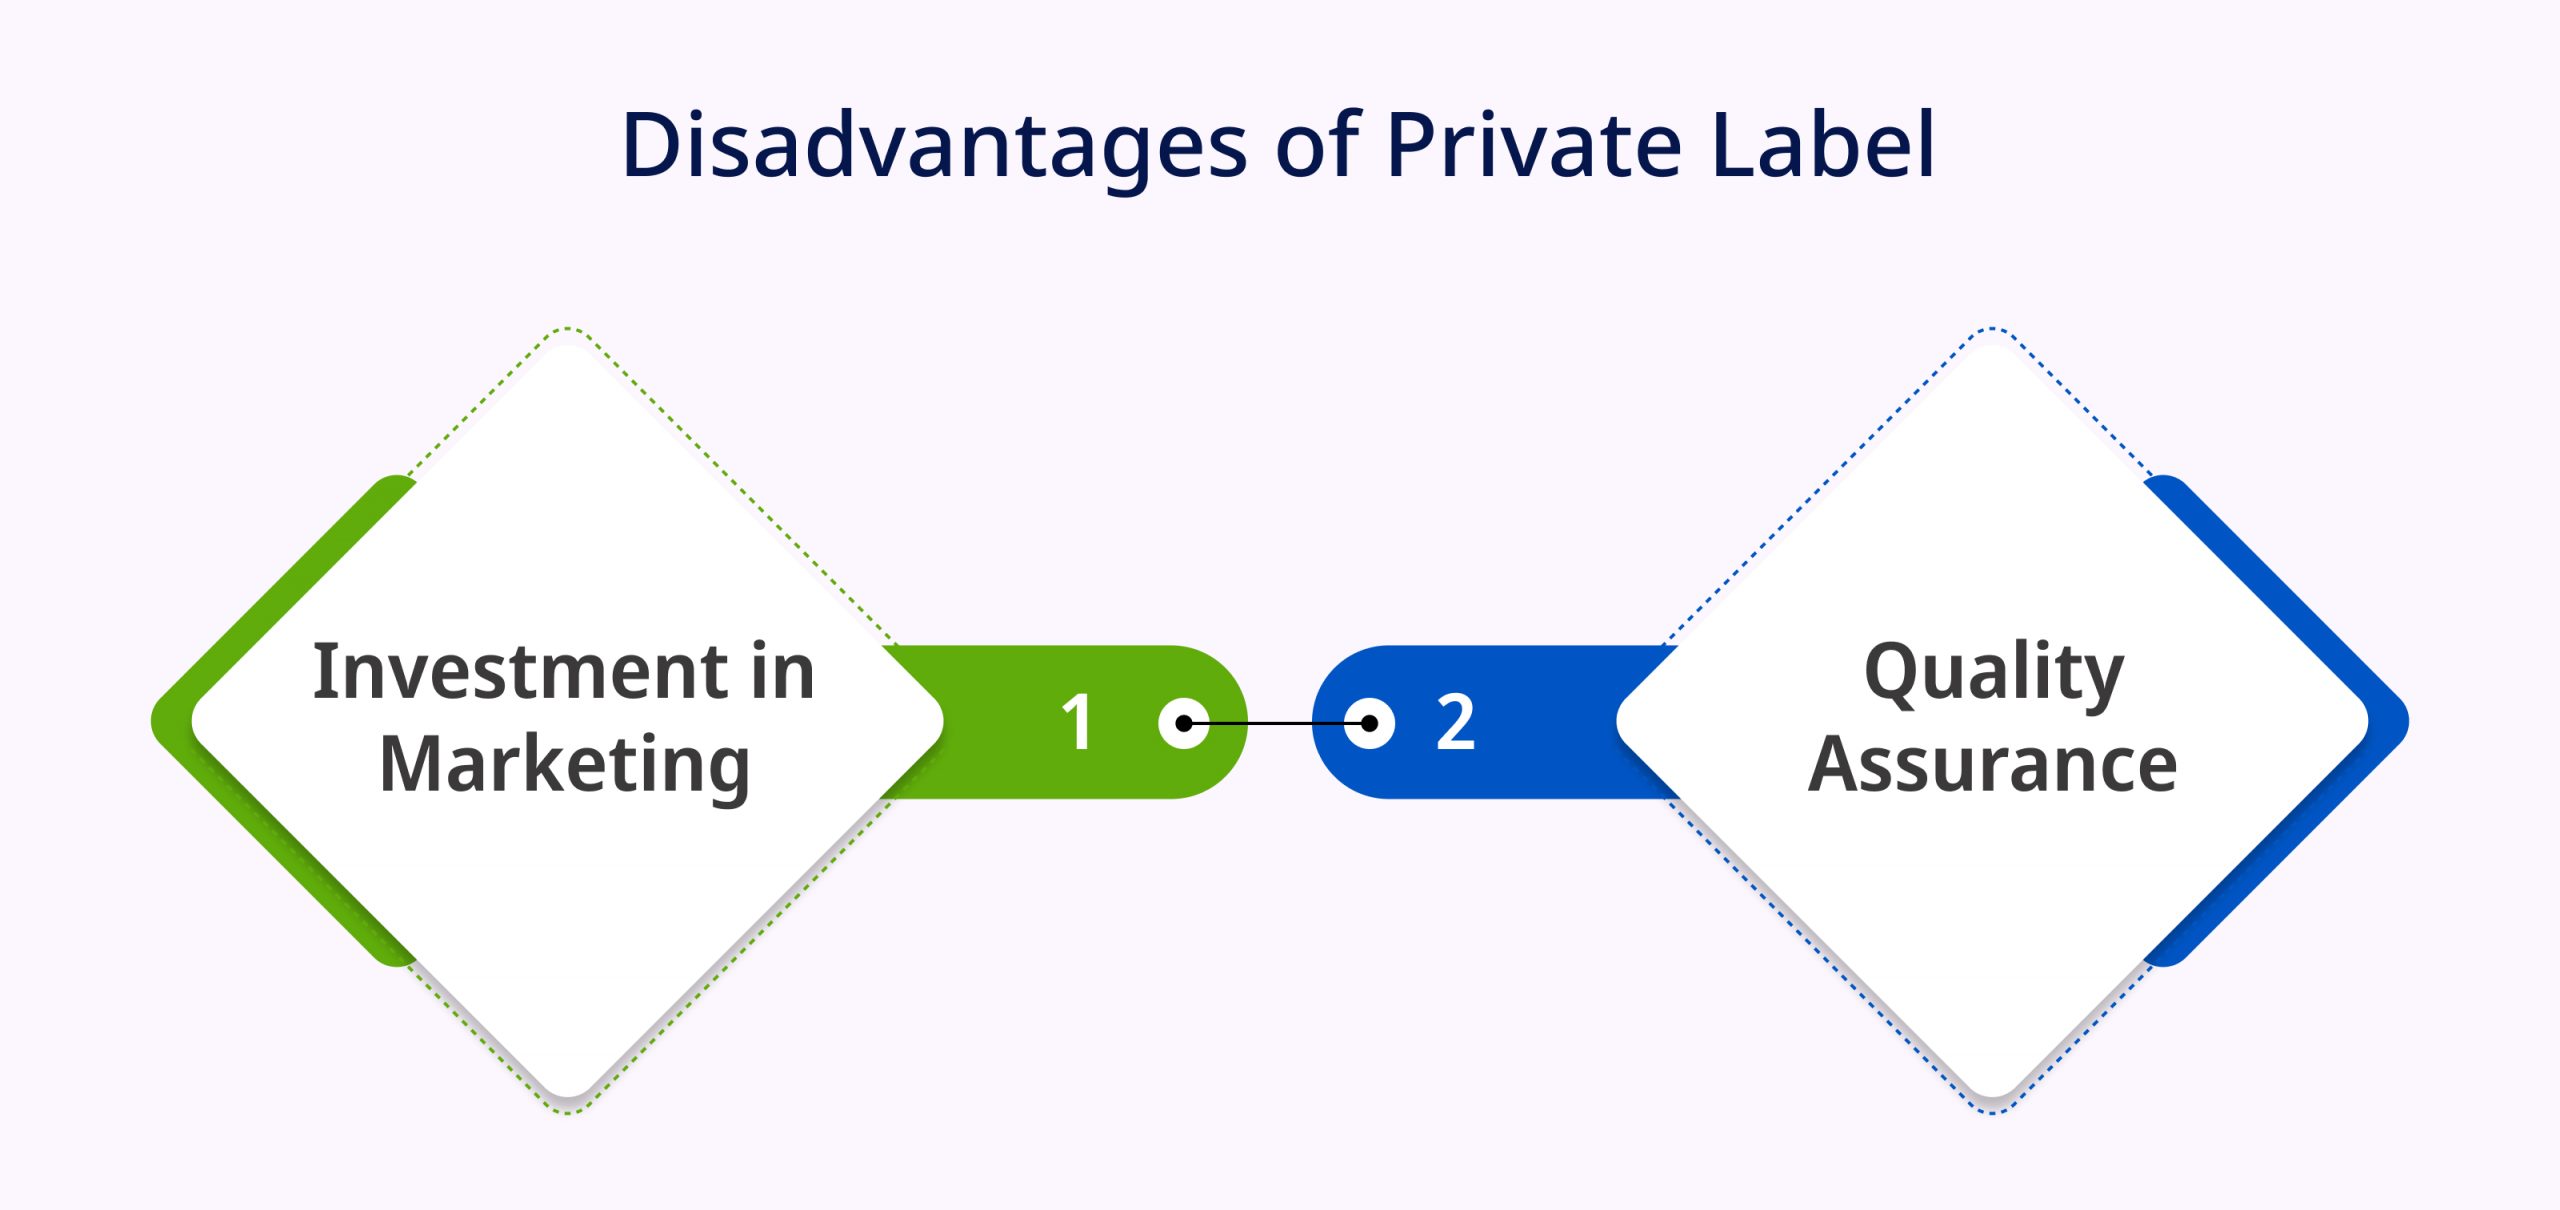 Disadvantages of Private Label